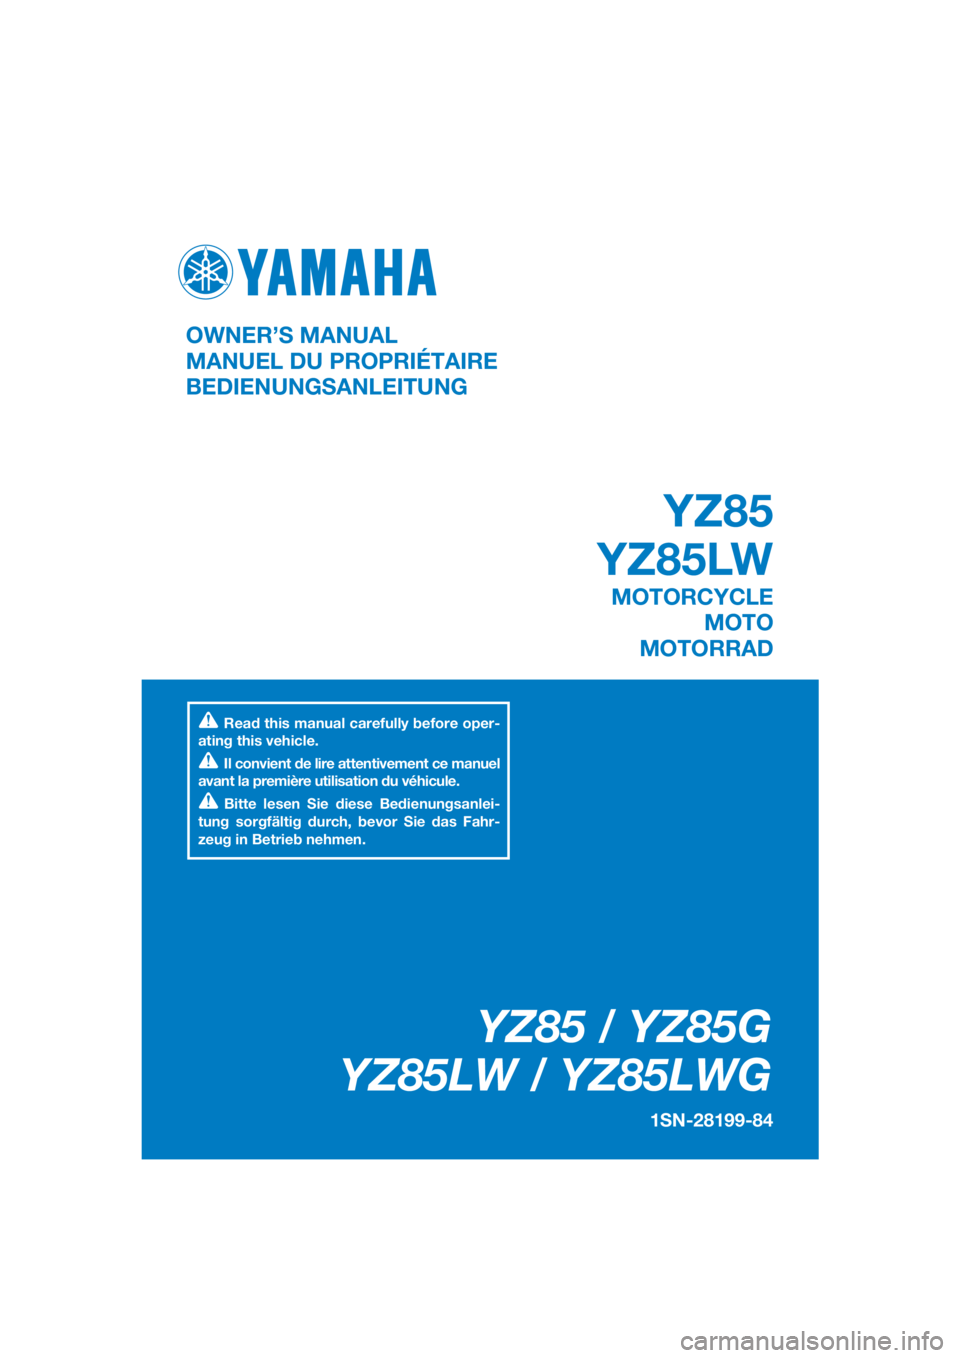 YAMAHA YZ85 2016  Owners Manual DIC183
YZ85 / YZ85G
YZ85LW / YZ85LWG
1SN-28199-84
OWNER’S MANUAL
MANUEL DU PROPRIÉTAIRE
BEDIENUNGSANLEITUNG
Read this manual carefully before oper-
ating this vehicle.
Il convient de lire attentive